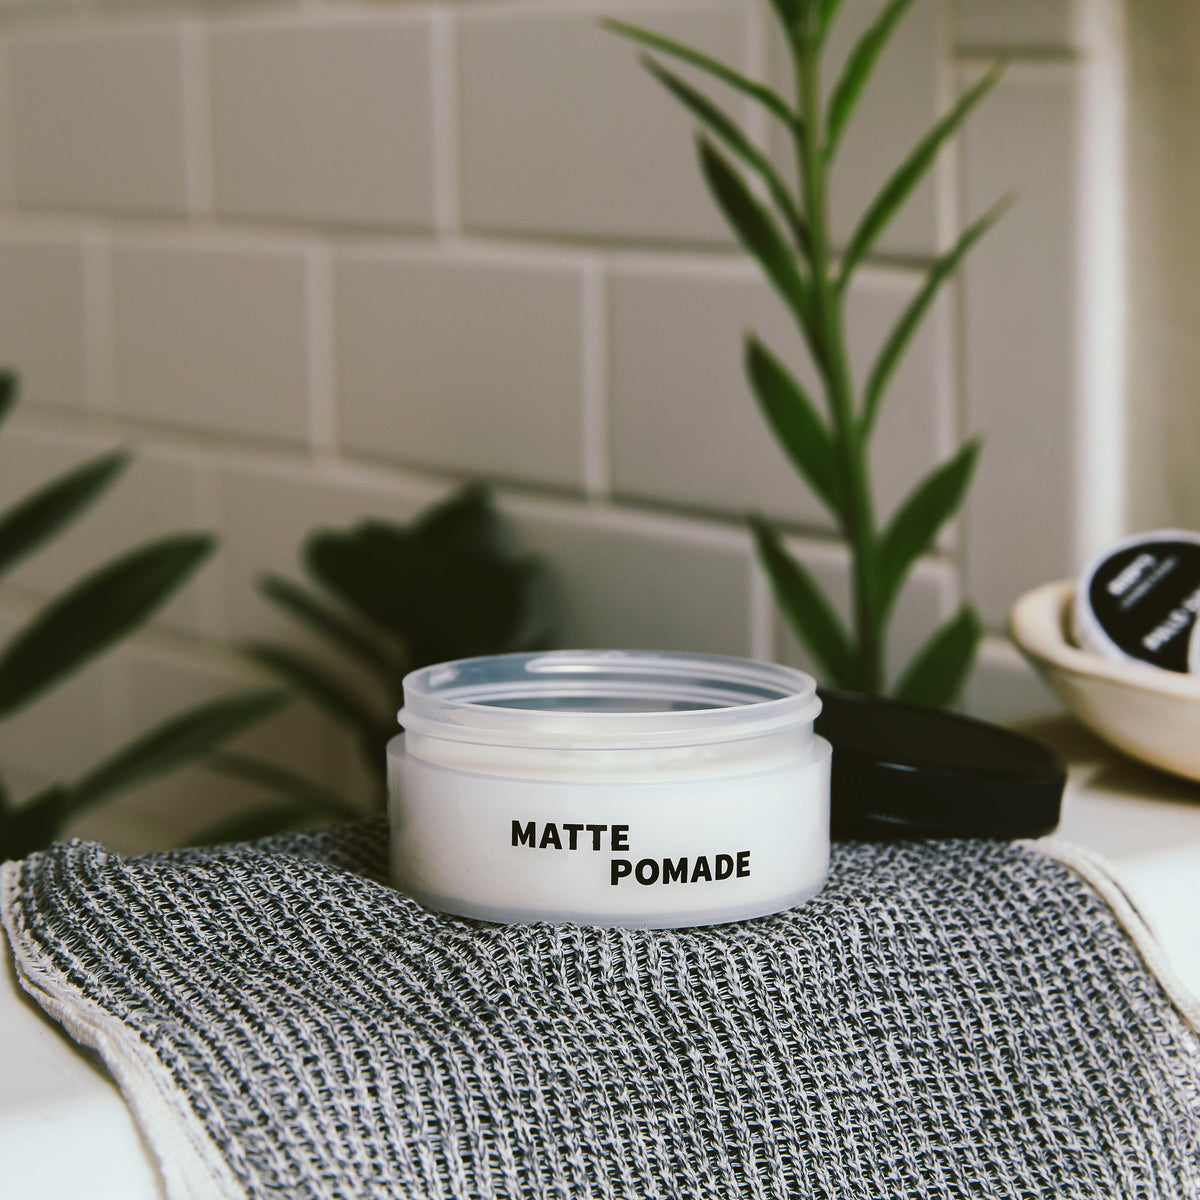 Open jar of Matte Pomade on towel on a sink with plants in the background